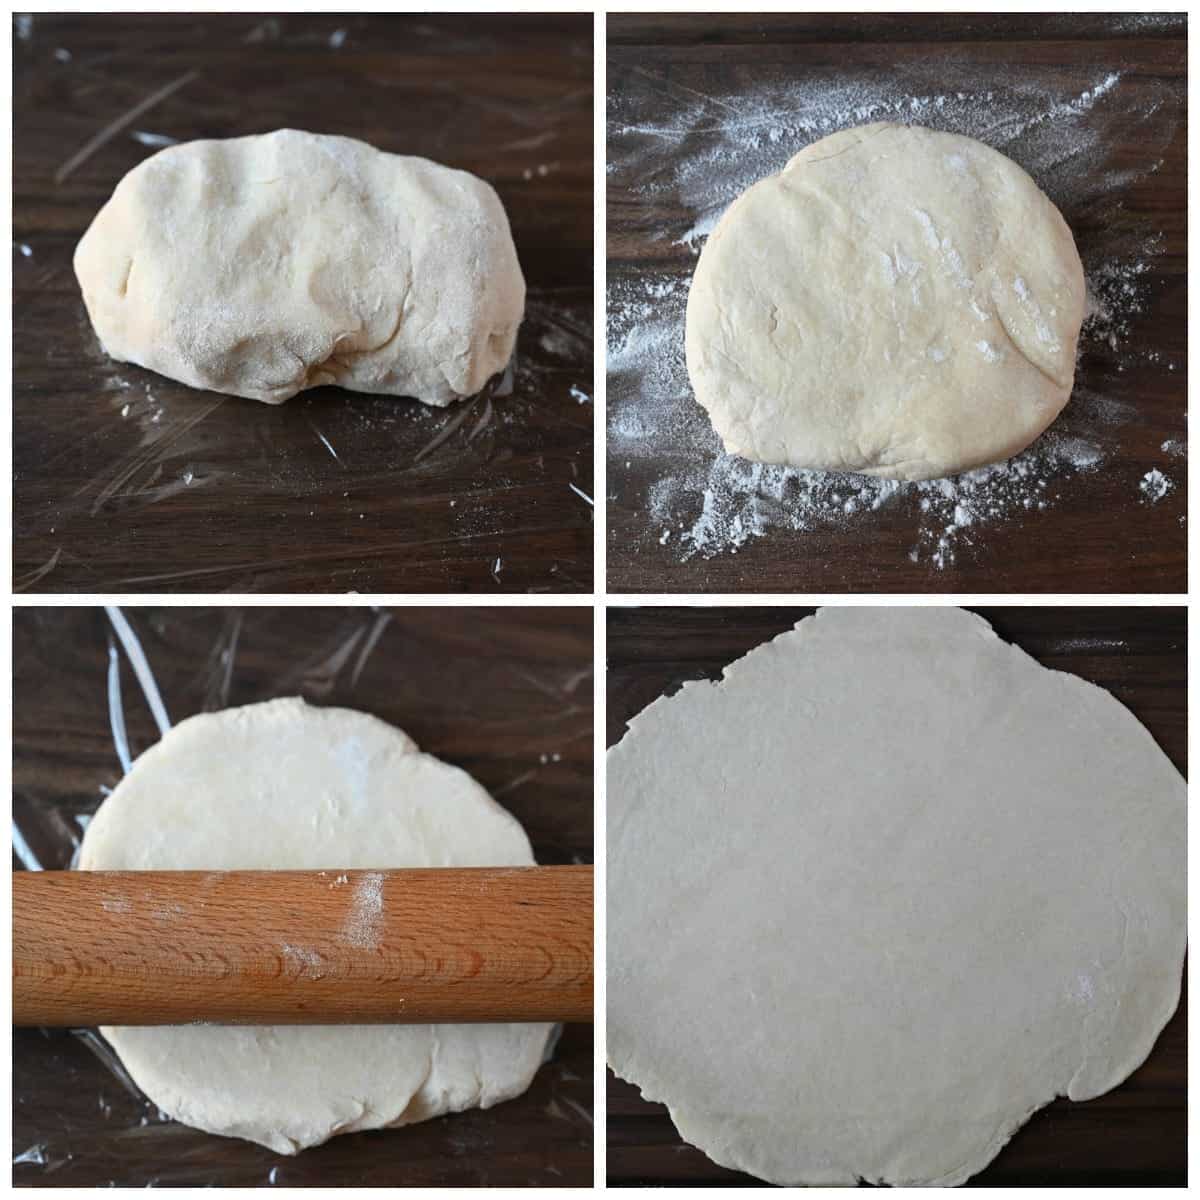 Four process photos. First one, dough chilled and ready. Second one, dough placed on a floured surface. Third one, rolling pin rolling the dough out. Fourth one, a large pie crust rolled out on a cutting board.